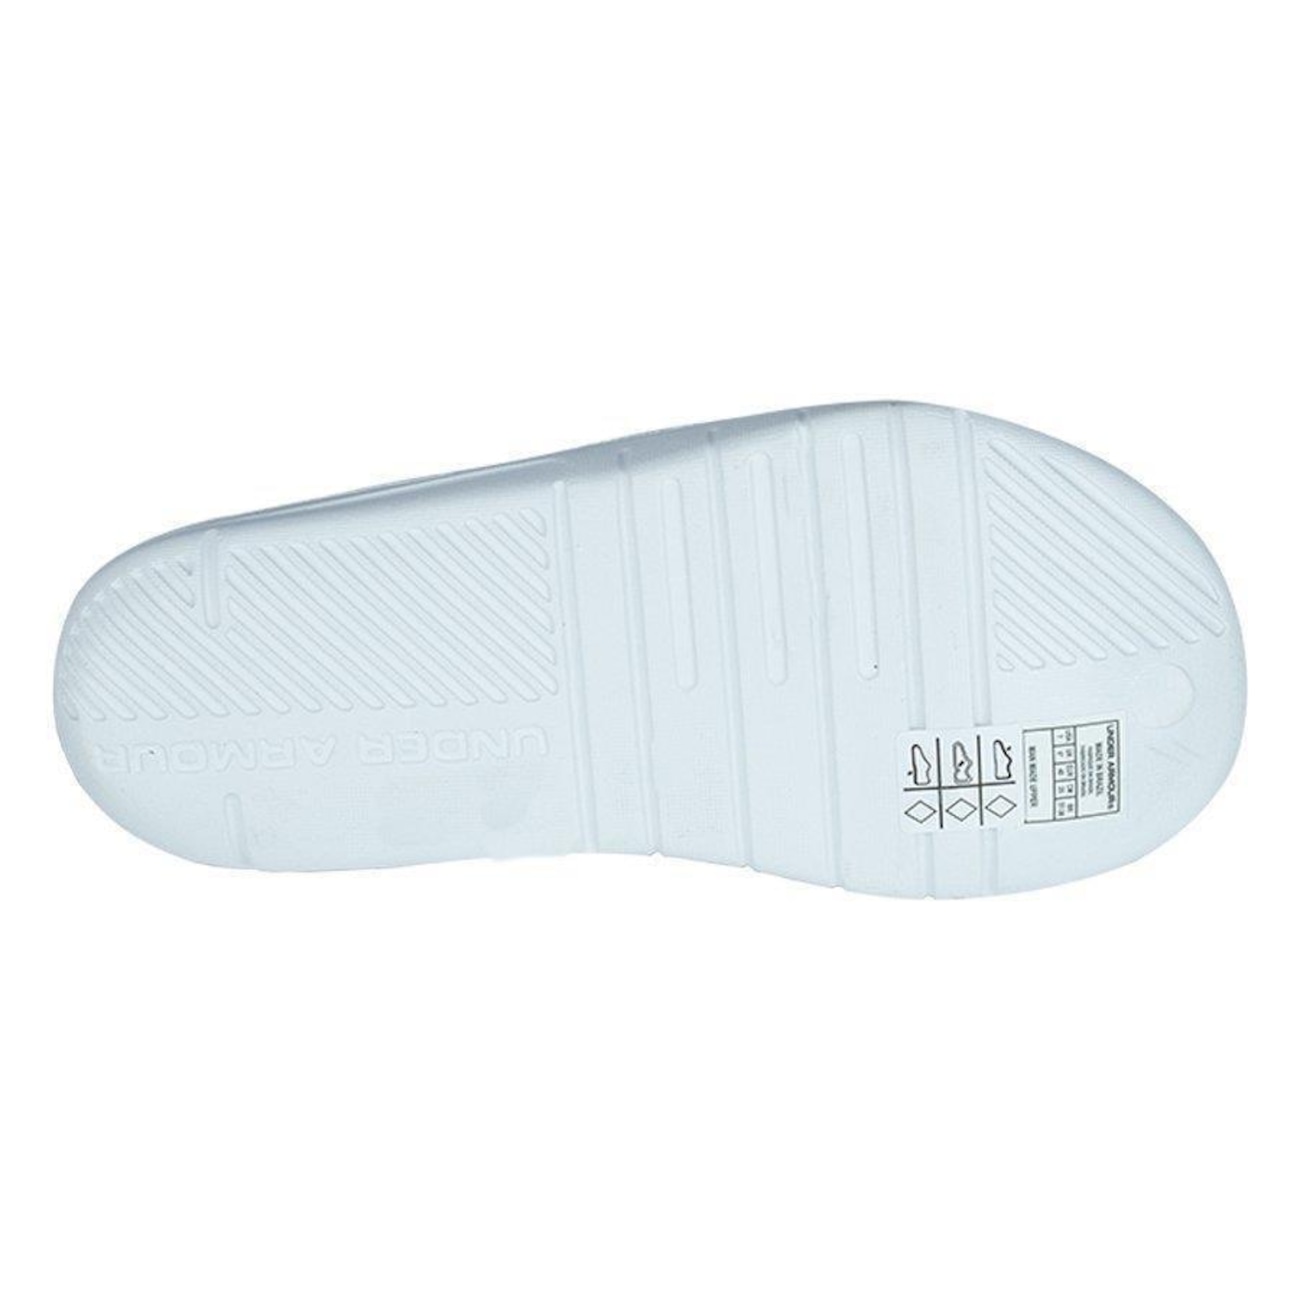 Chinelo Under Armour Slide Core Masculino